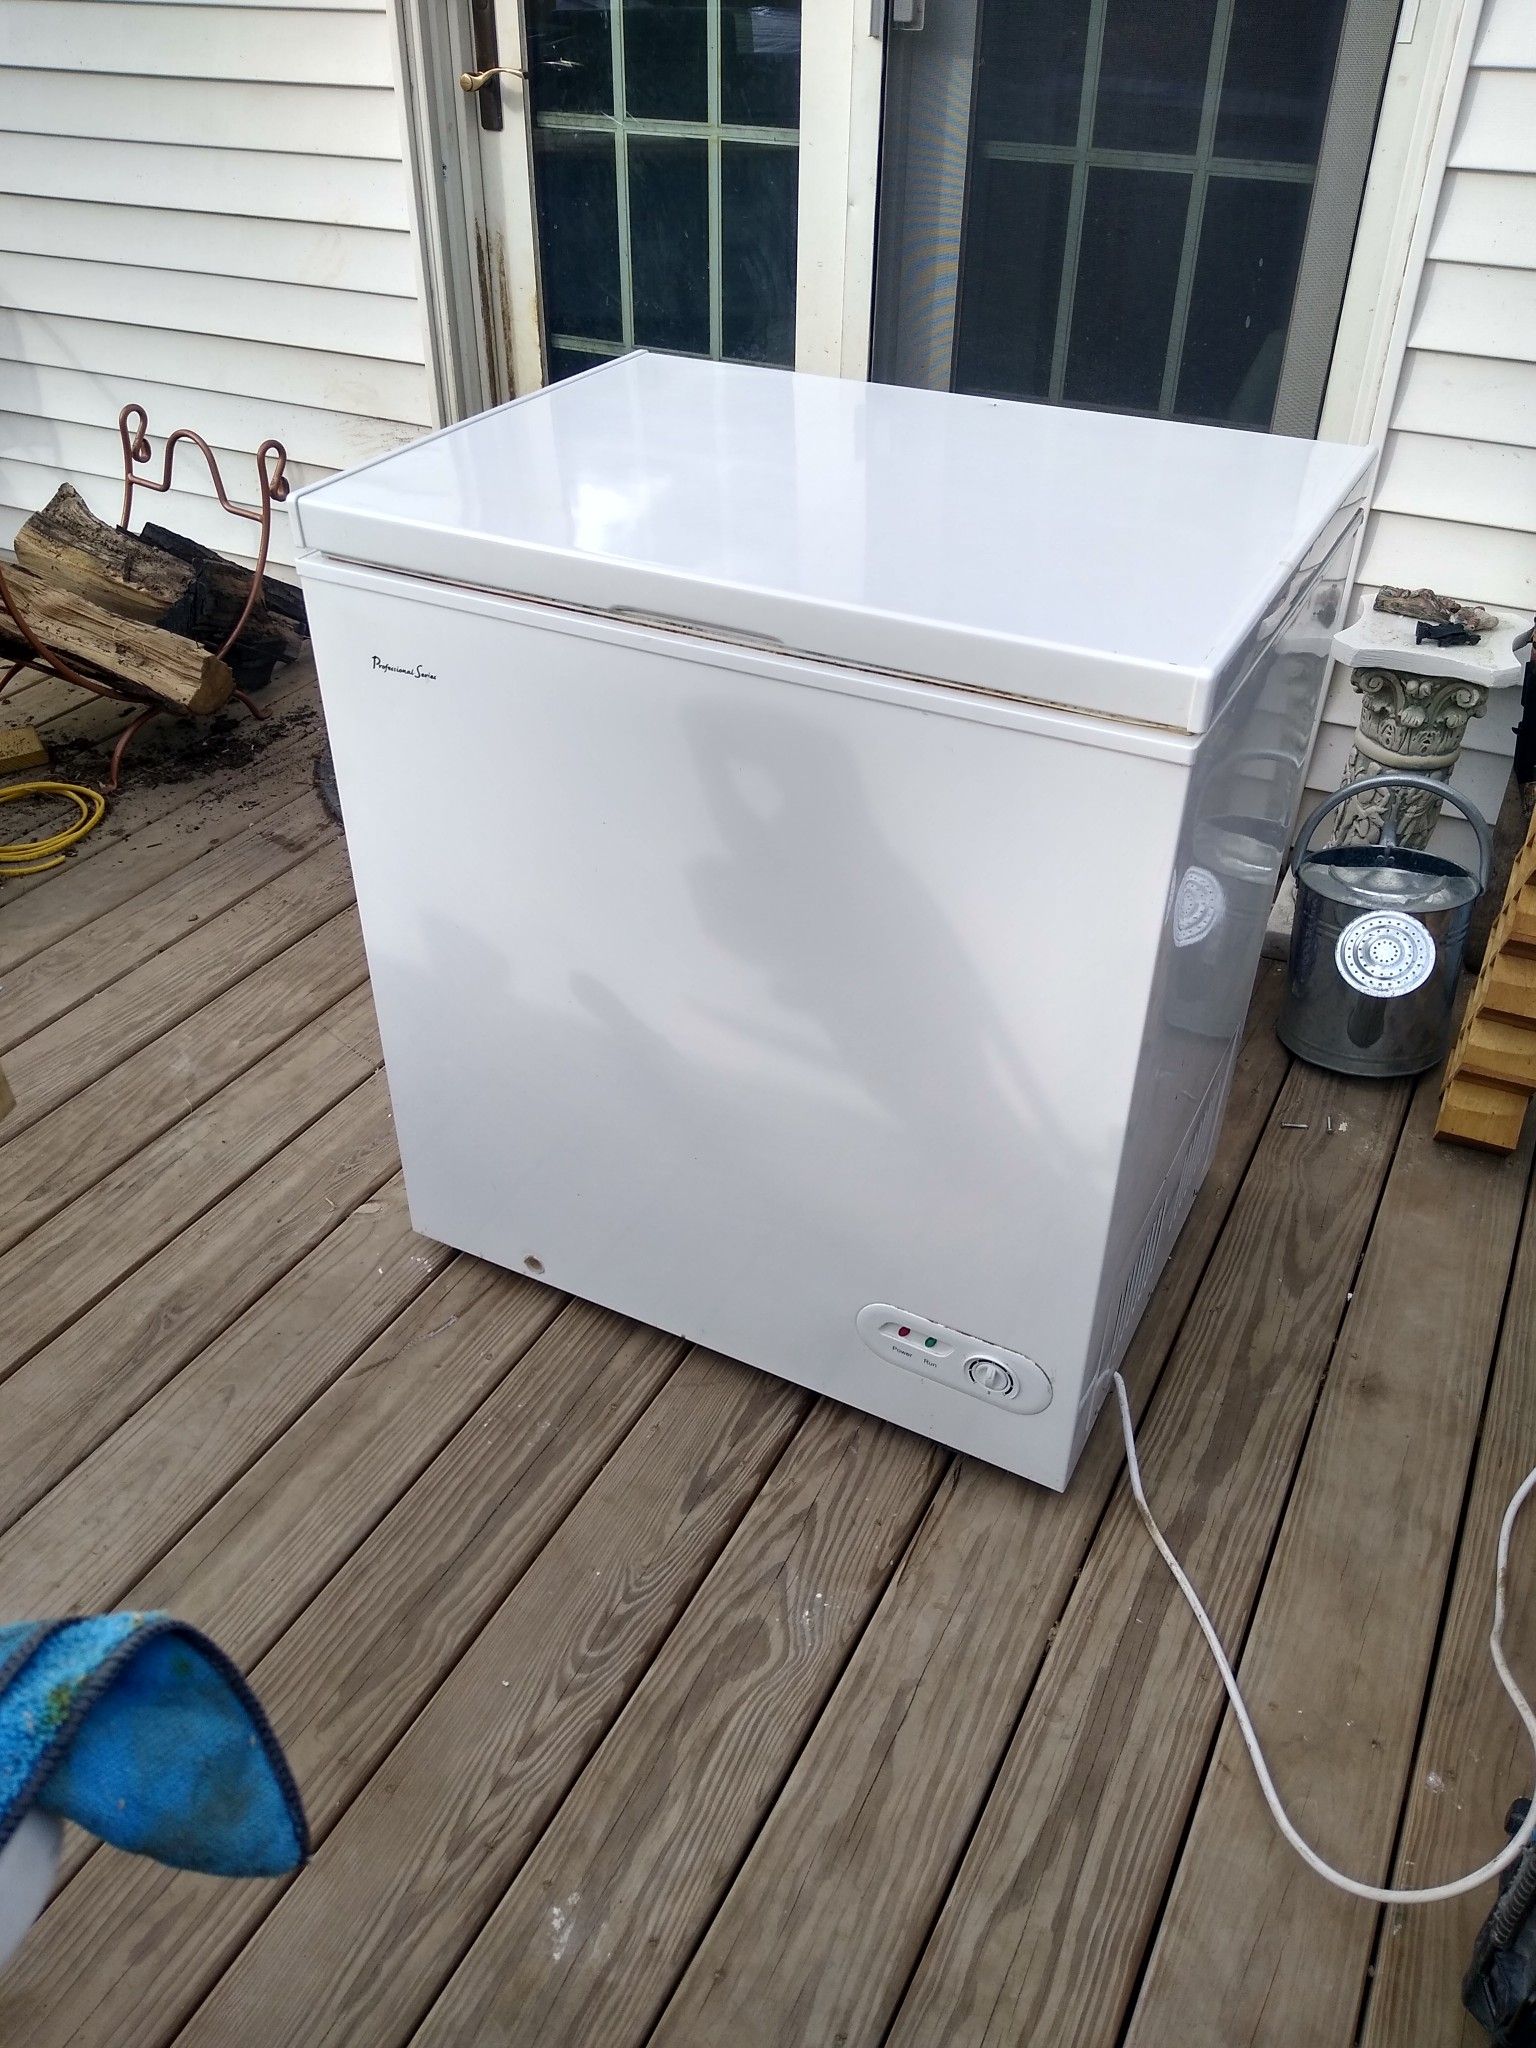 Fairly new professional series chest freezer works great moving need to sell quick